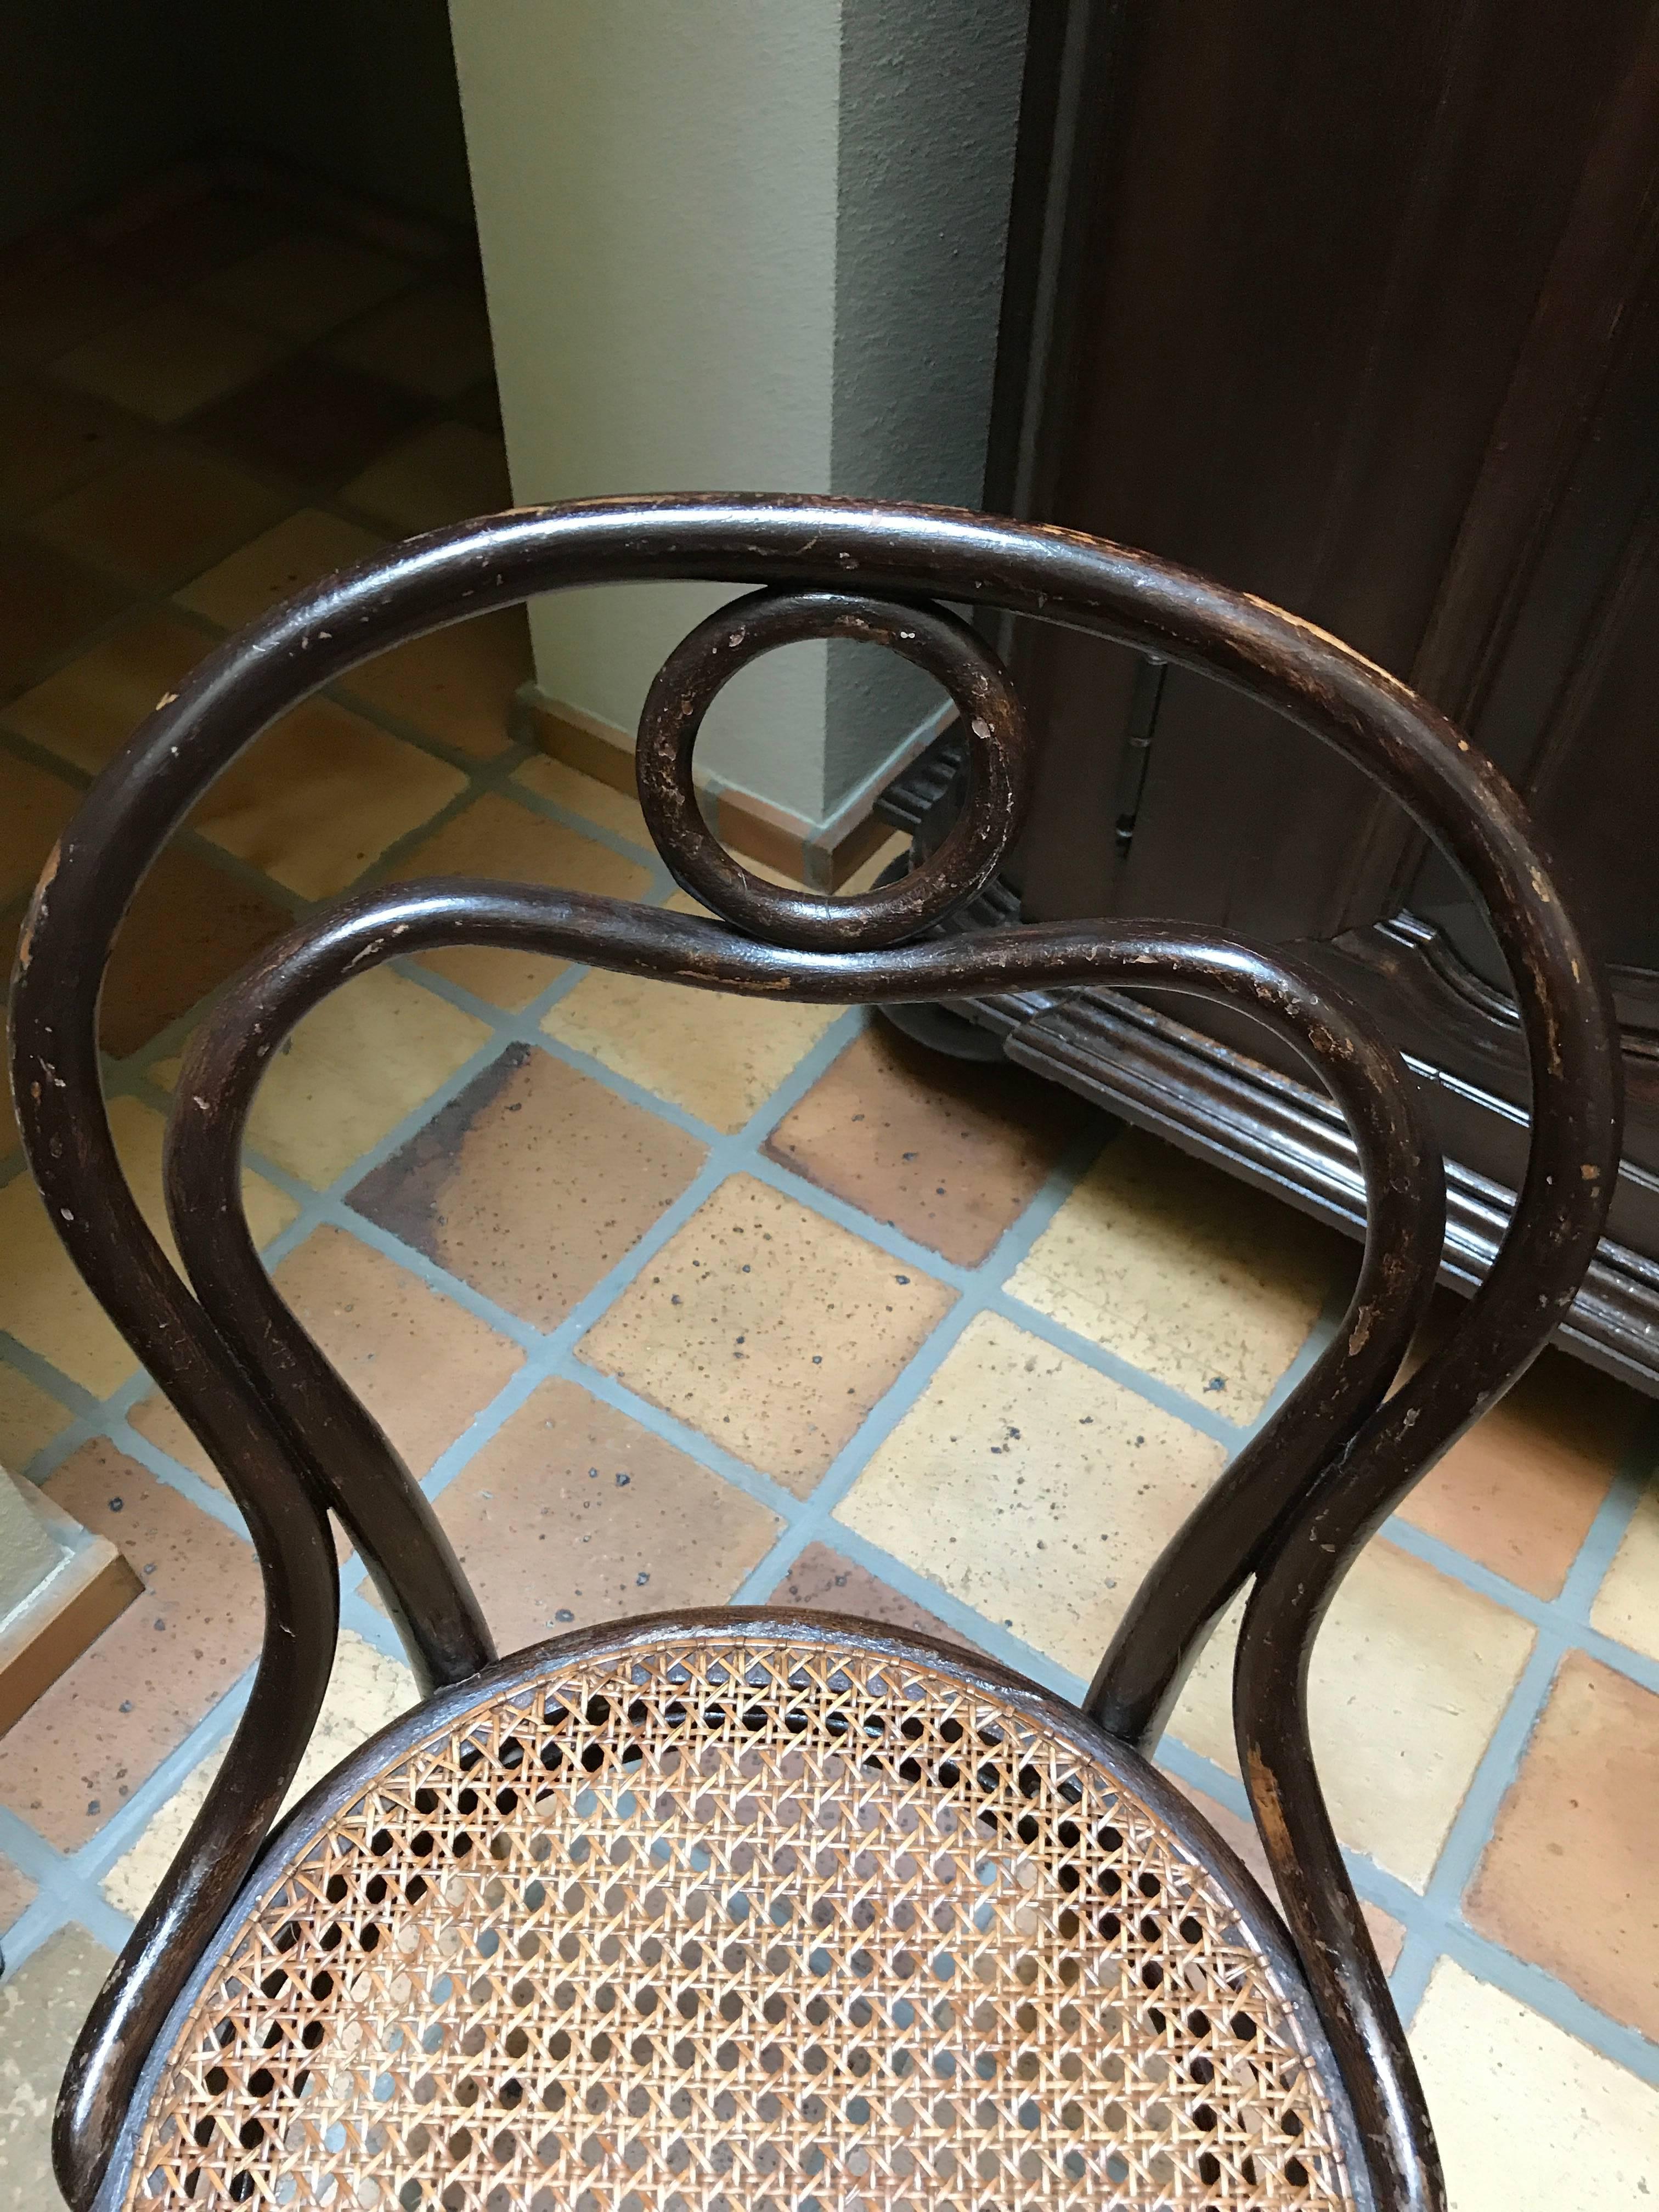 thonet bentwood chairs